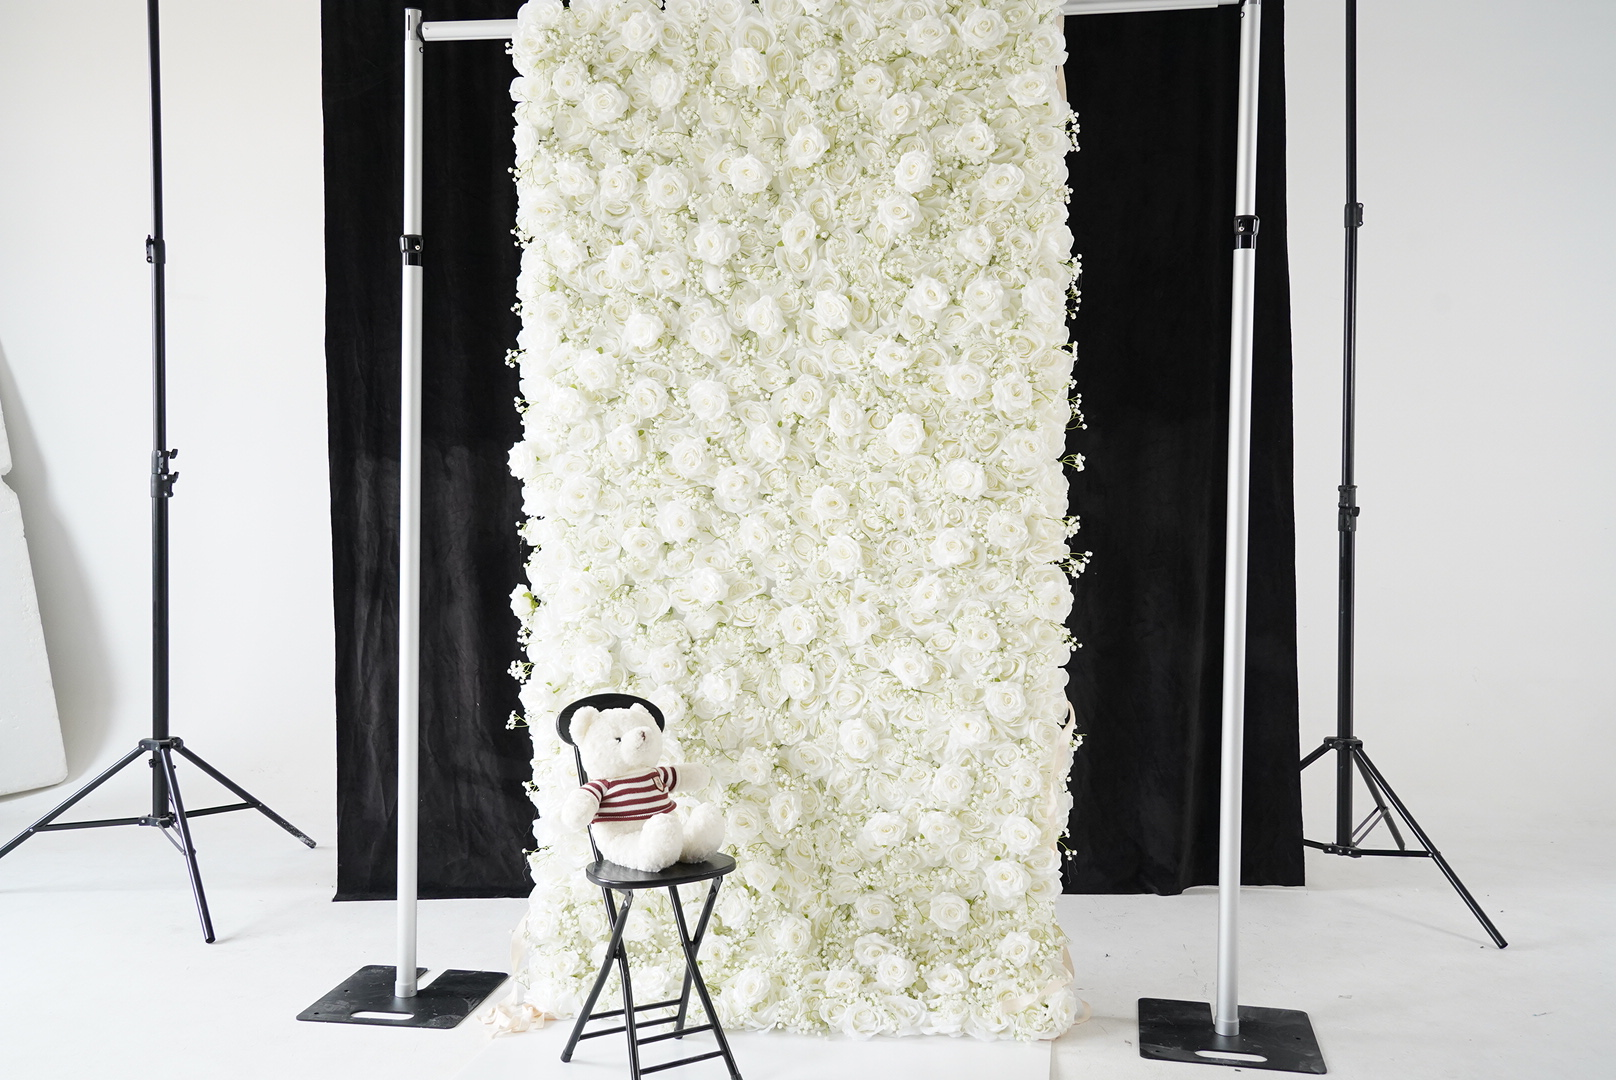 Placing a white bear in front of the baby breath pure white rose fabric flower wall.